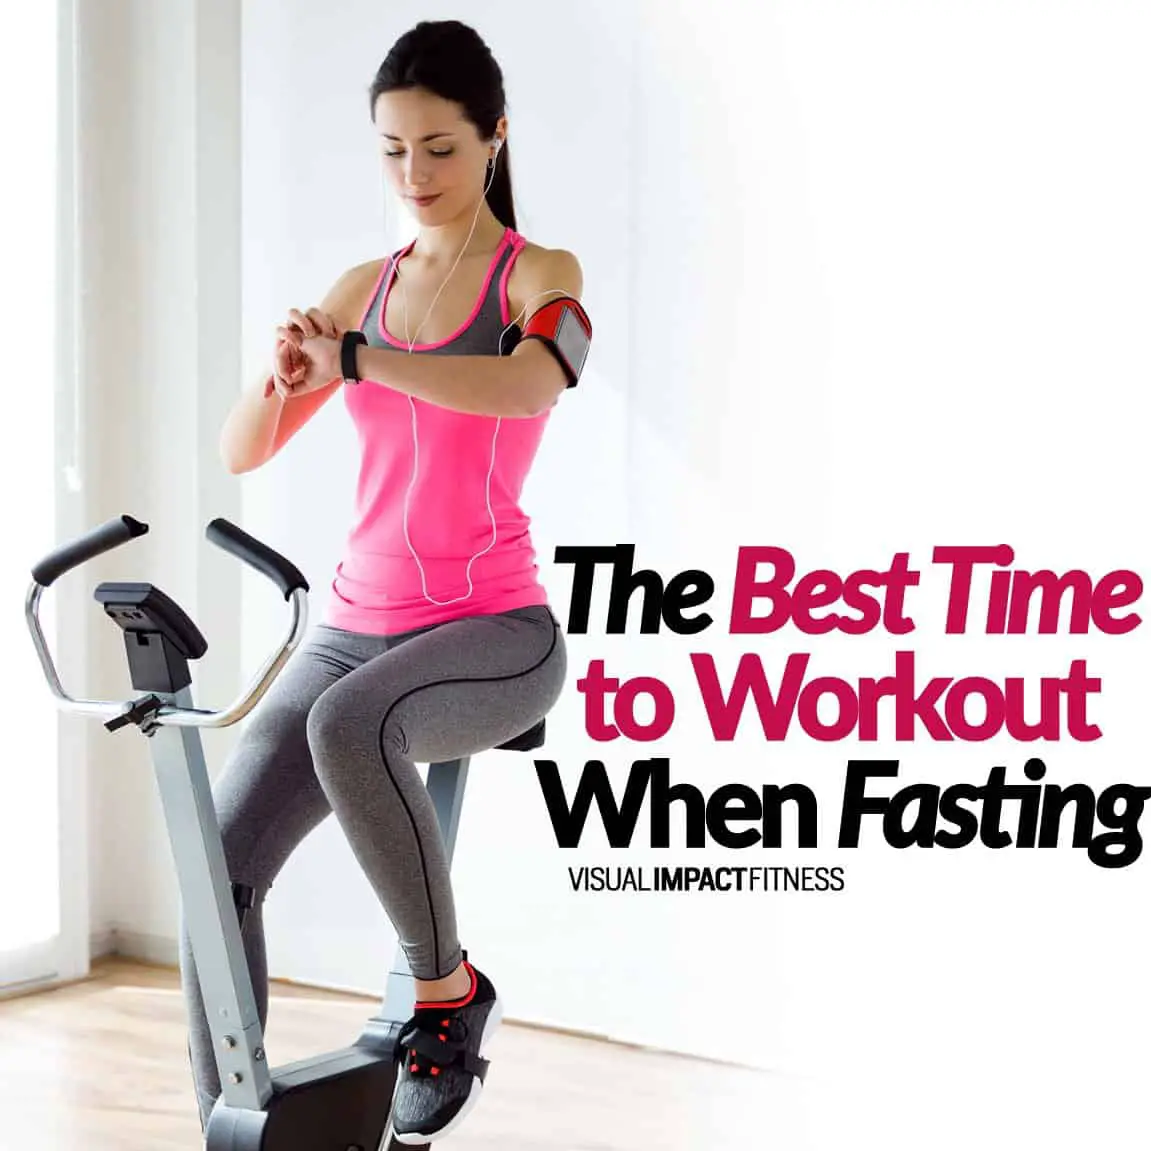 The Best Time to Workout When Fasting